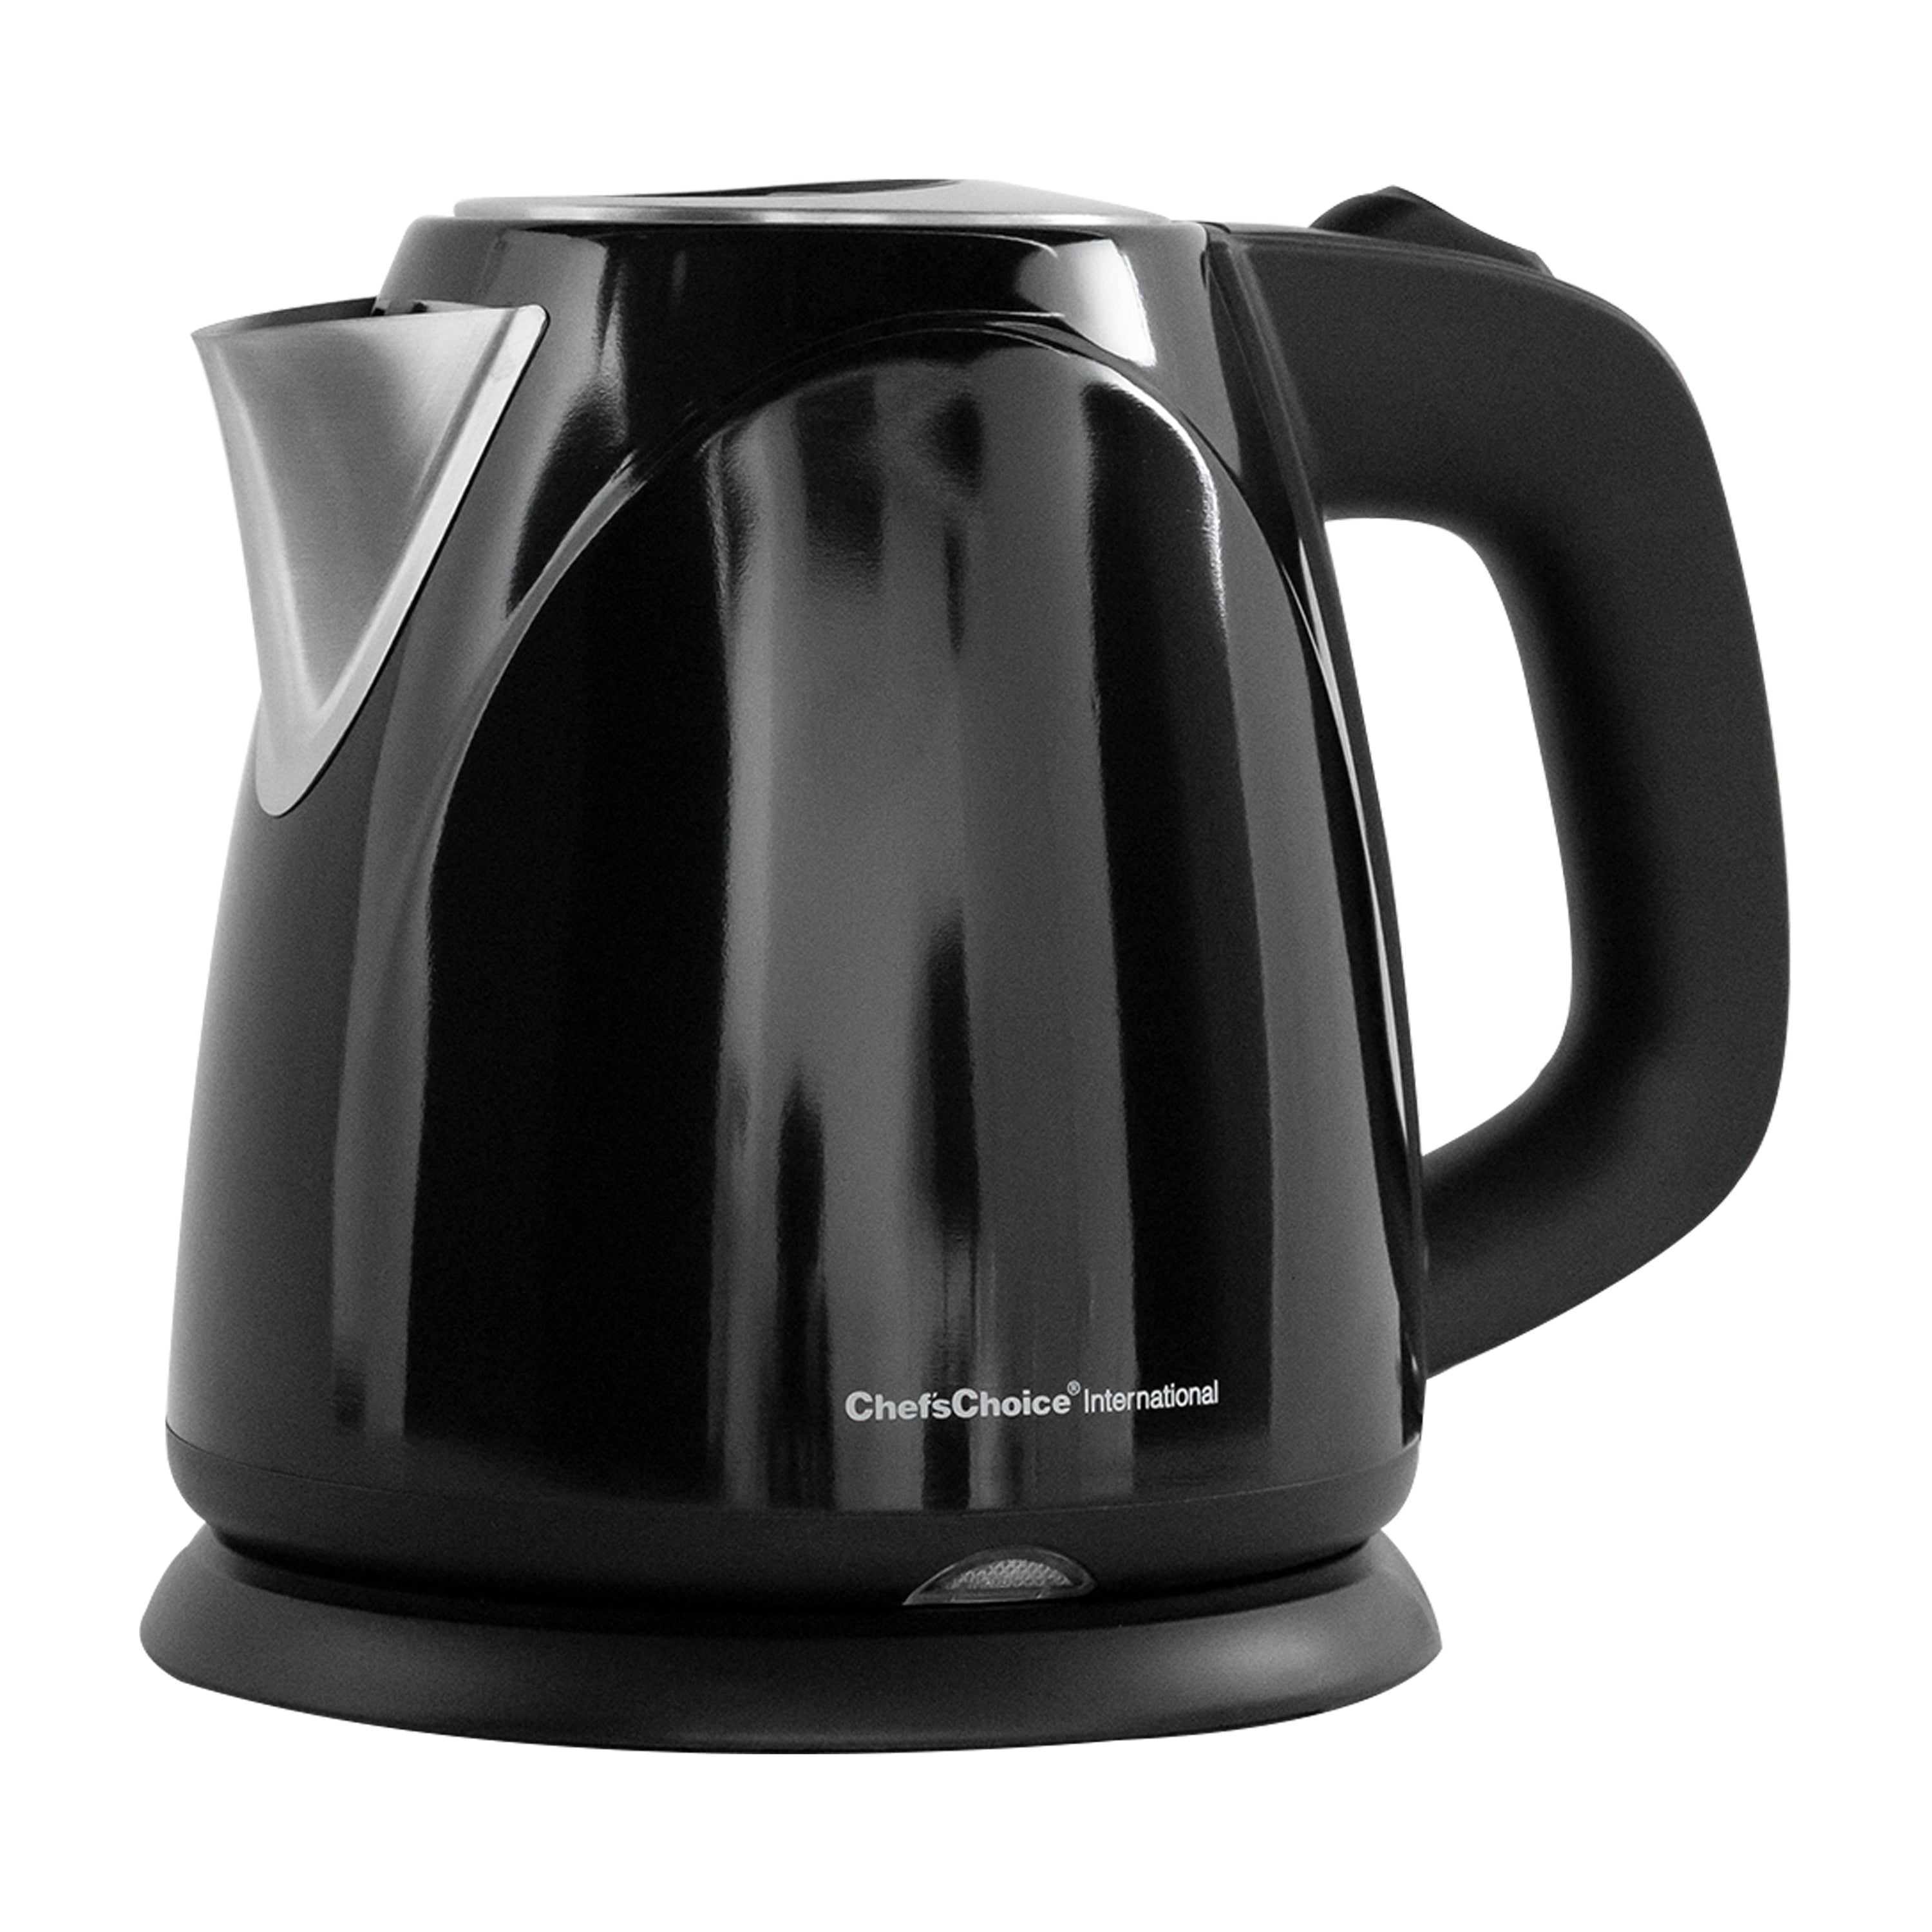 Eco + Chef 1.5 Liter Electric Kettle Cordless Kettle W/360 Degrees Base